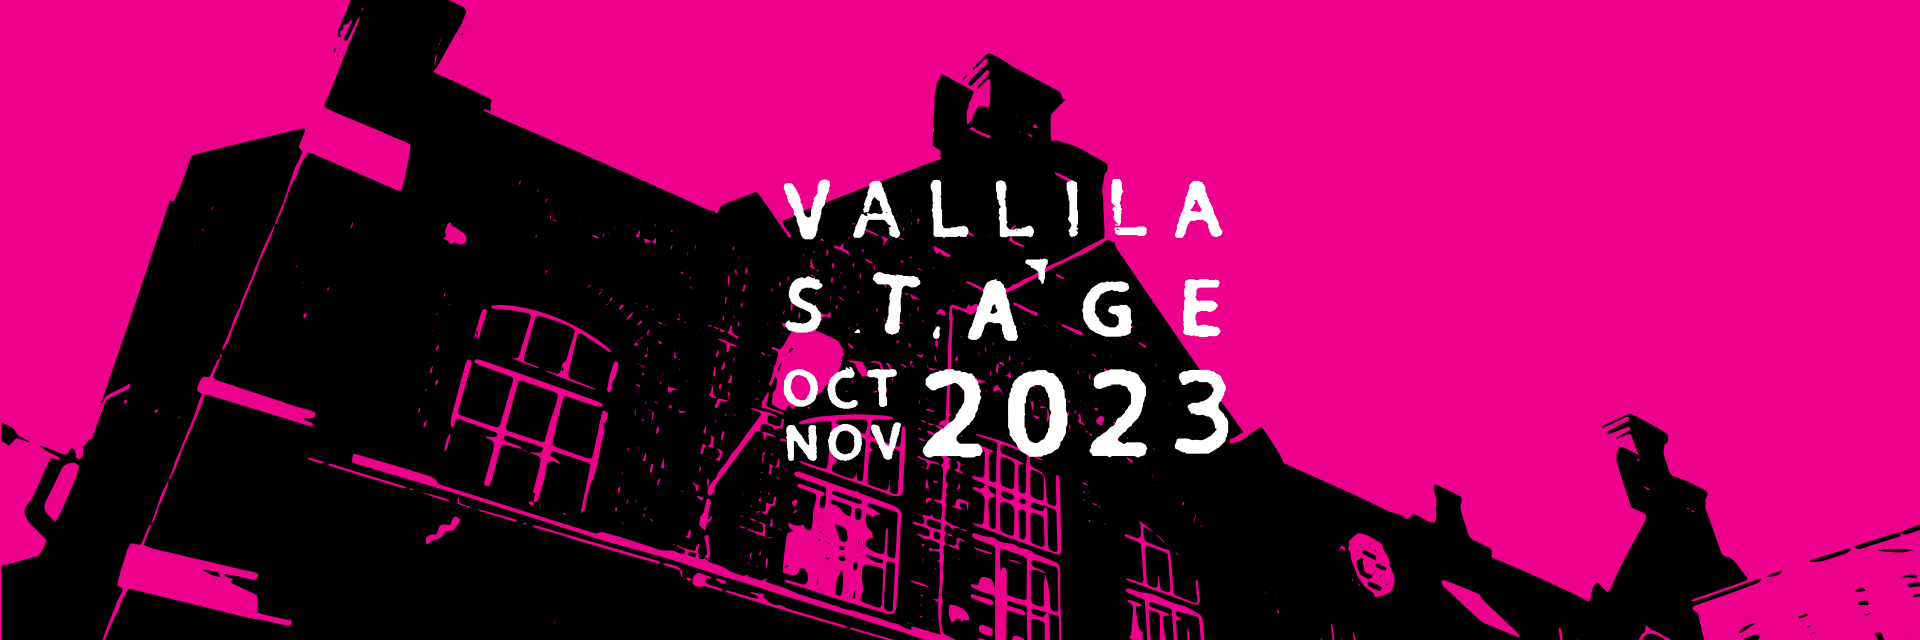 pink background, black silhouette of a house, white text vallila stage 2023